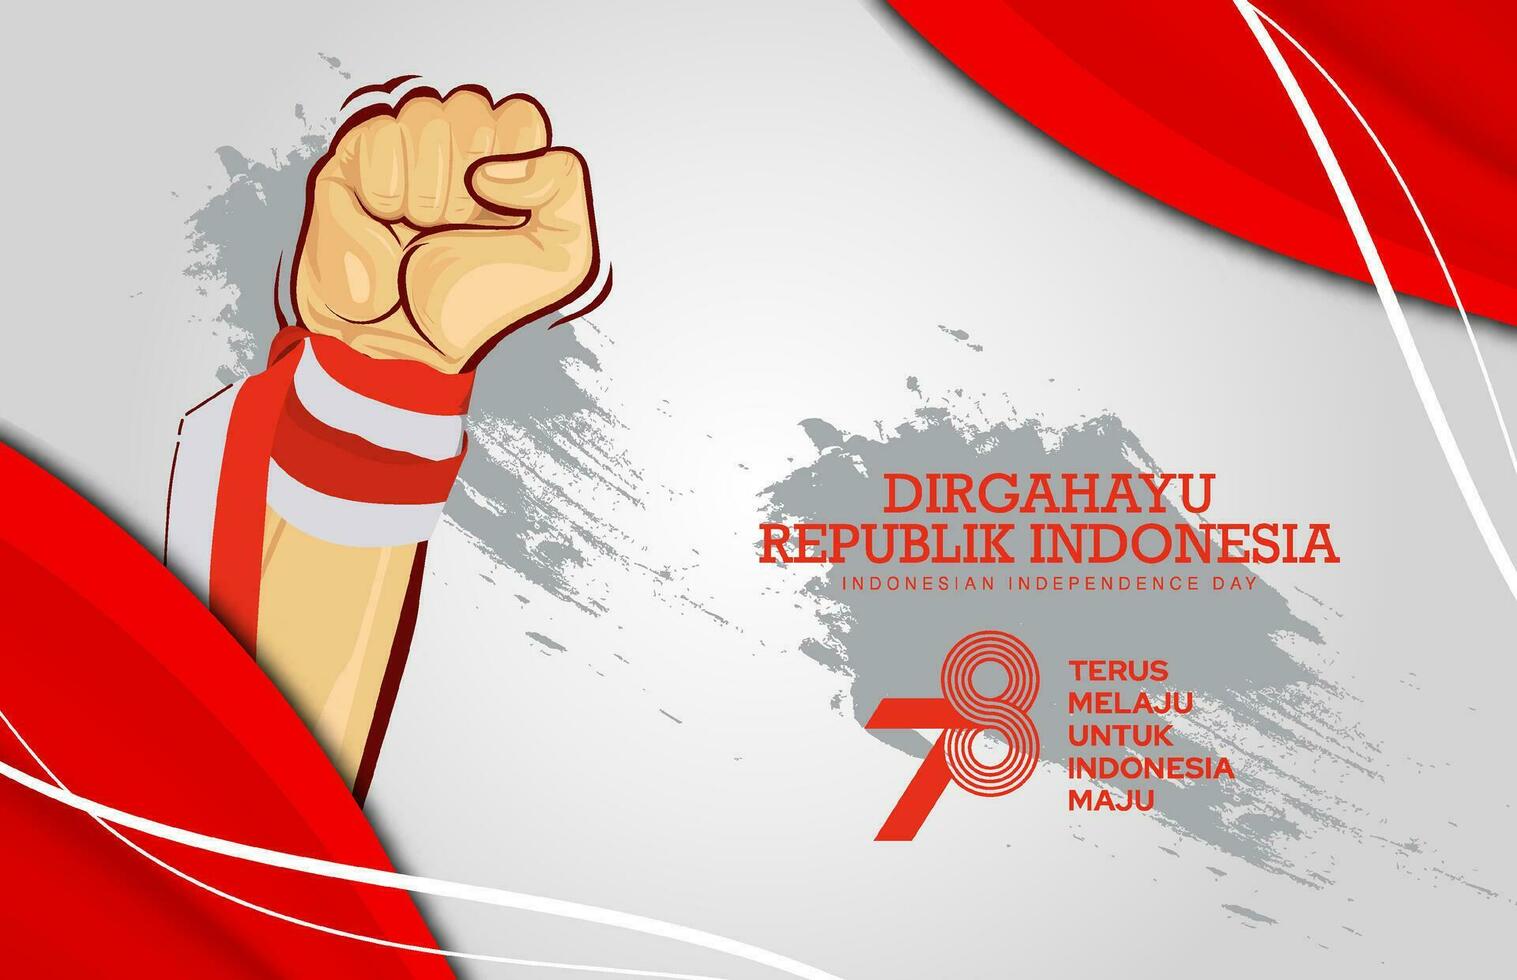 hands gesturing victory sign for Indonesia's independence day 17 agustus 1945 vector